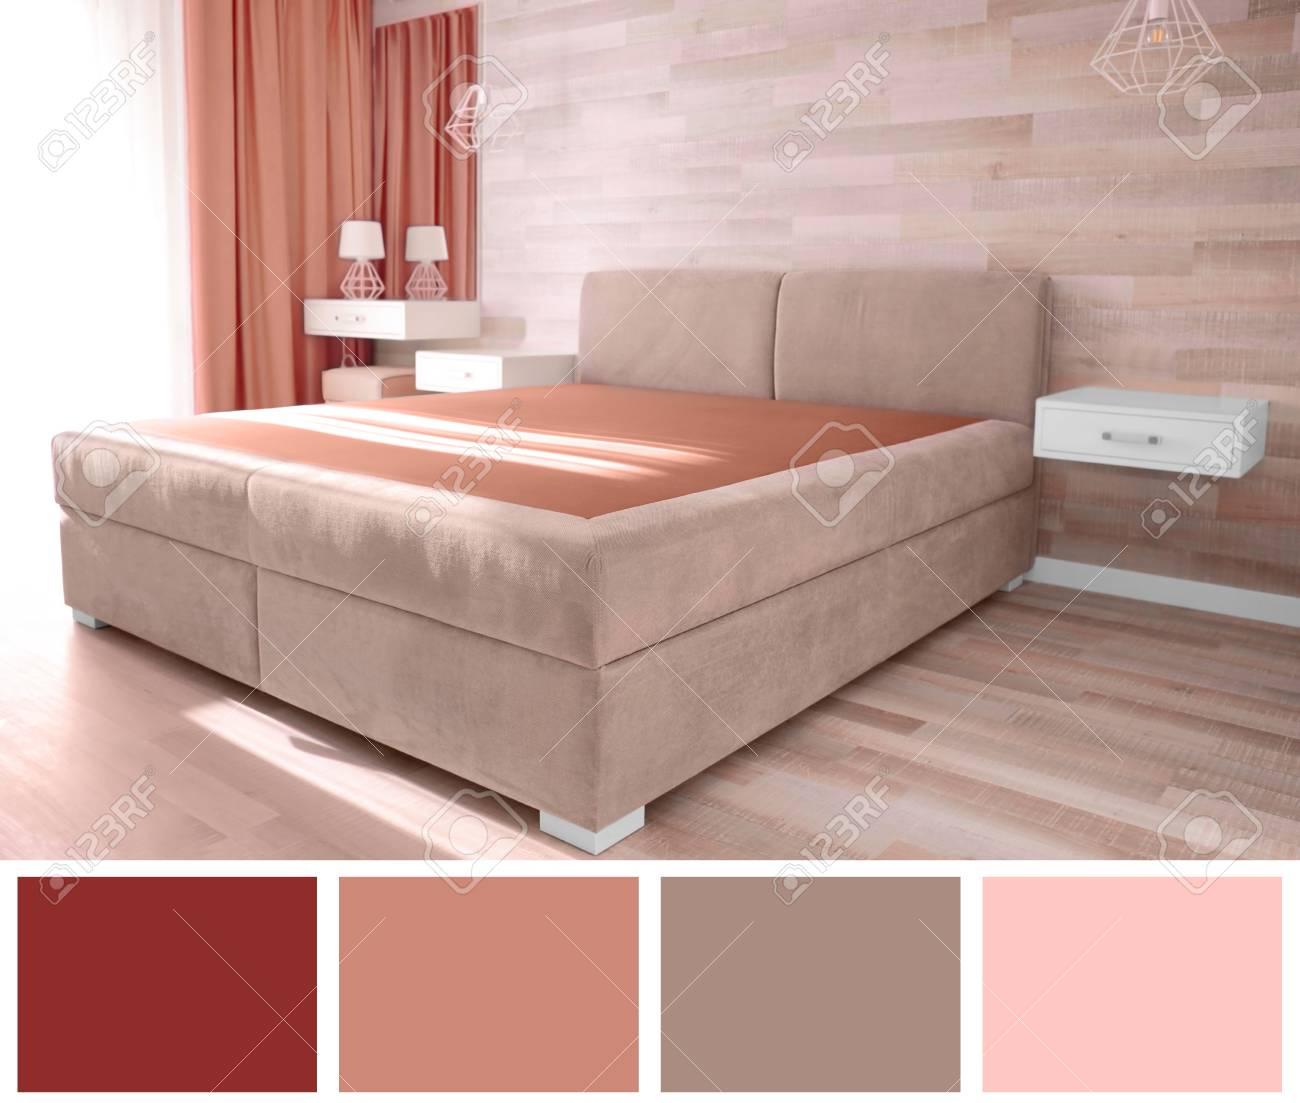 Modern Interior Of Bedroom And Palette With Salmon Color Stock Photo regarding sizing 1300 X 1103